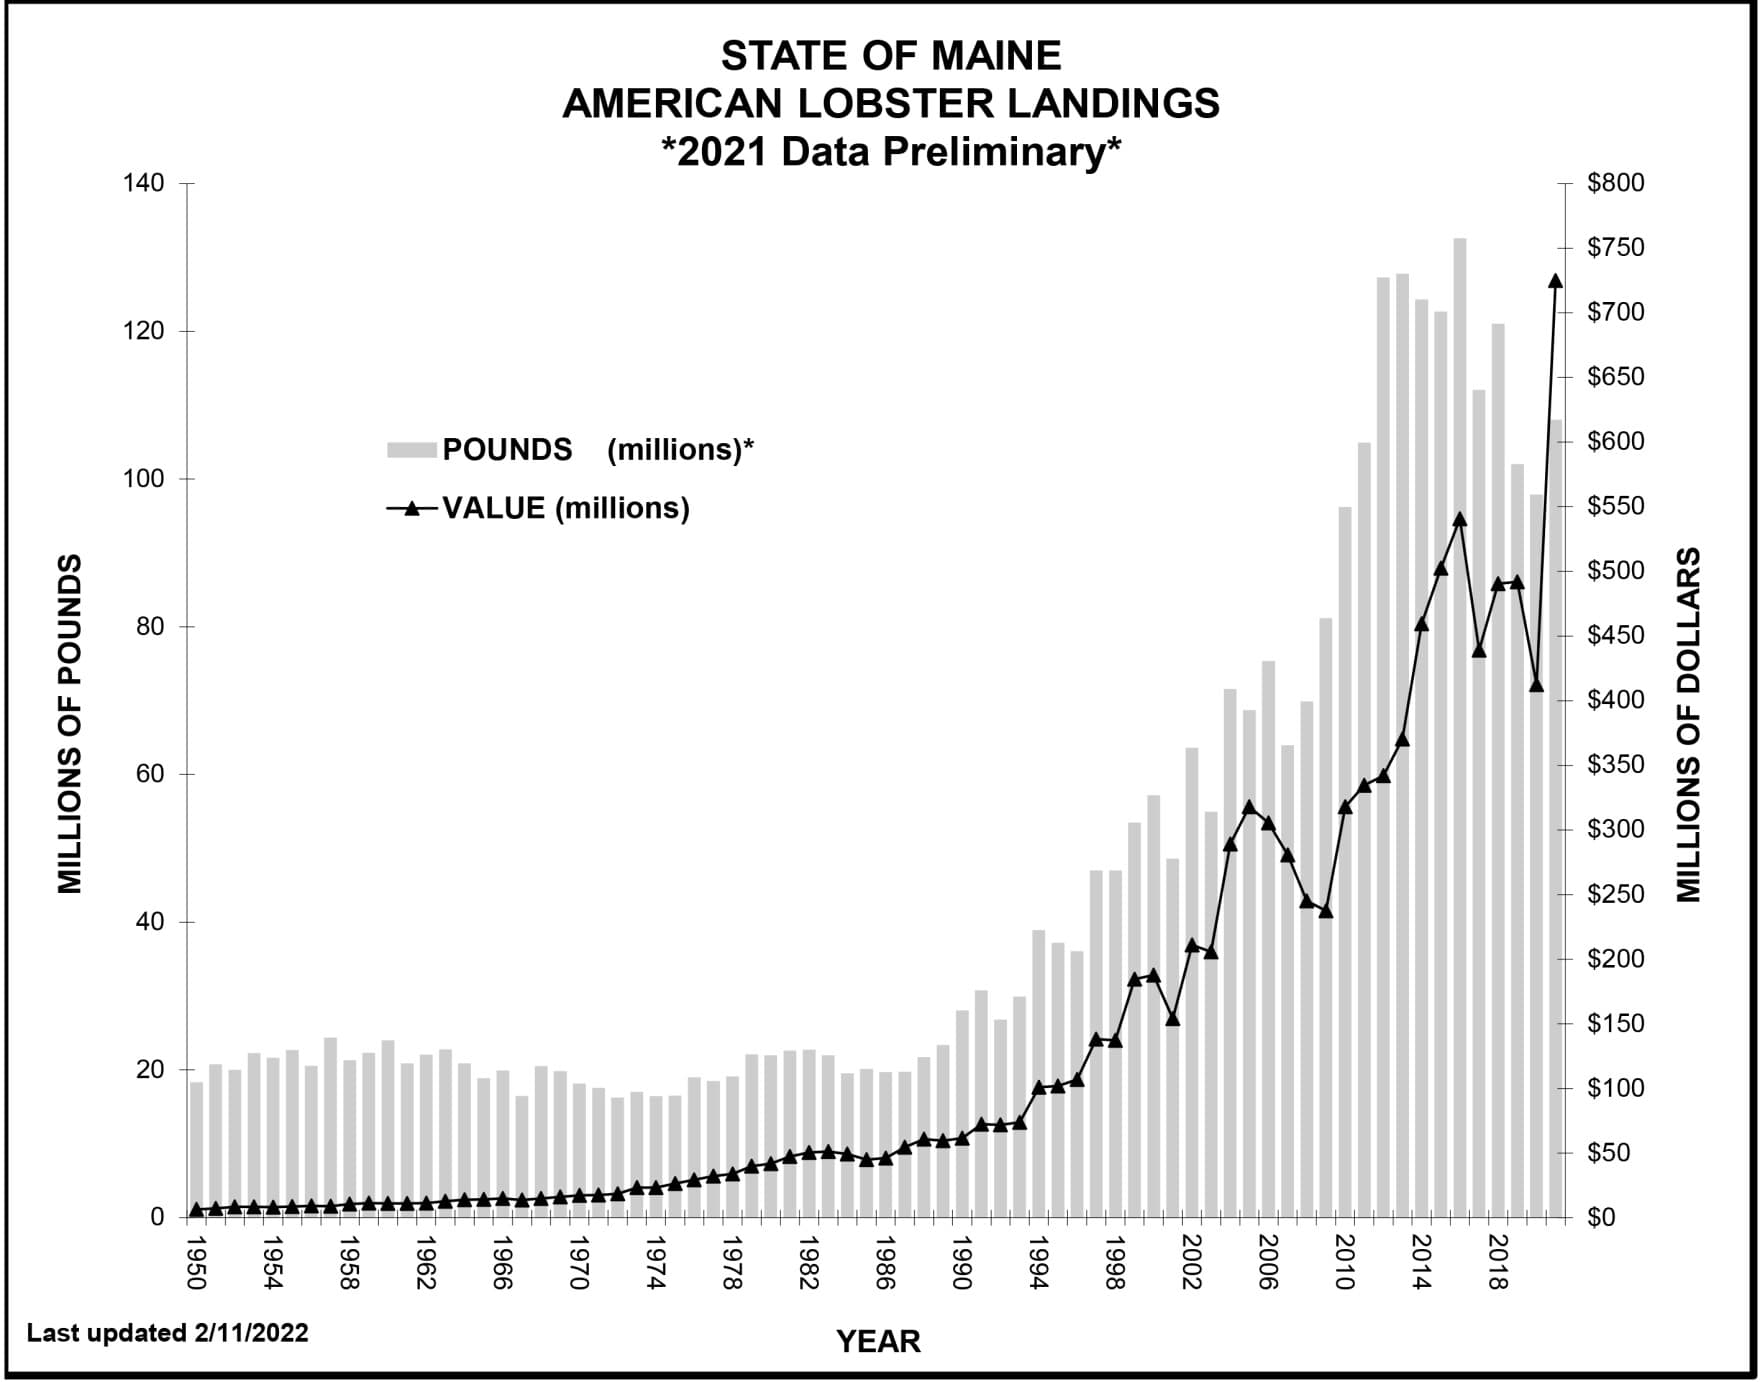 Lobster landings in Maine from 1950 to 2021. (Courtesy Maine Department Of Marine Resources)